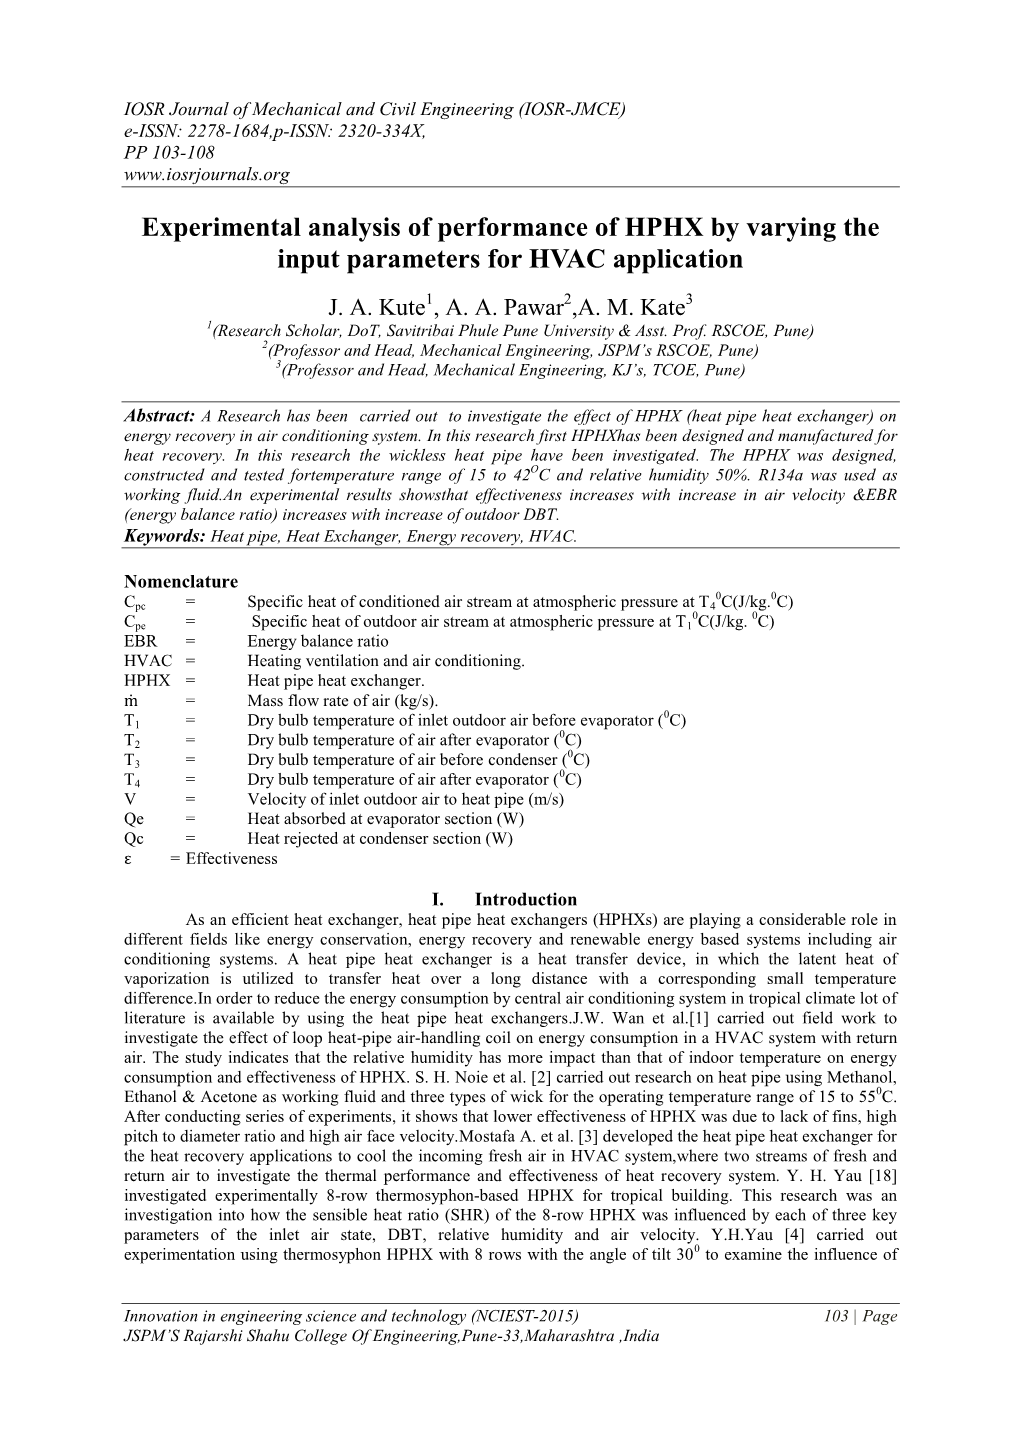 Experimental Analysis of Performance of HPHX by Varying the Input Parameters for HVAC Application